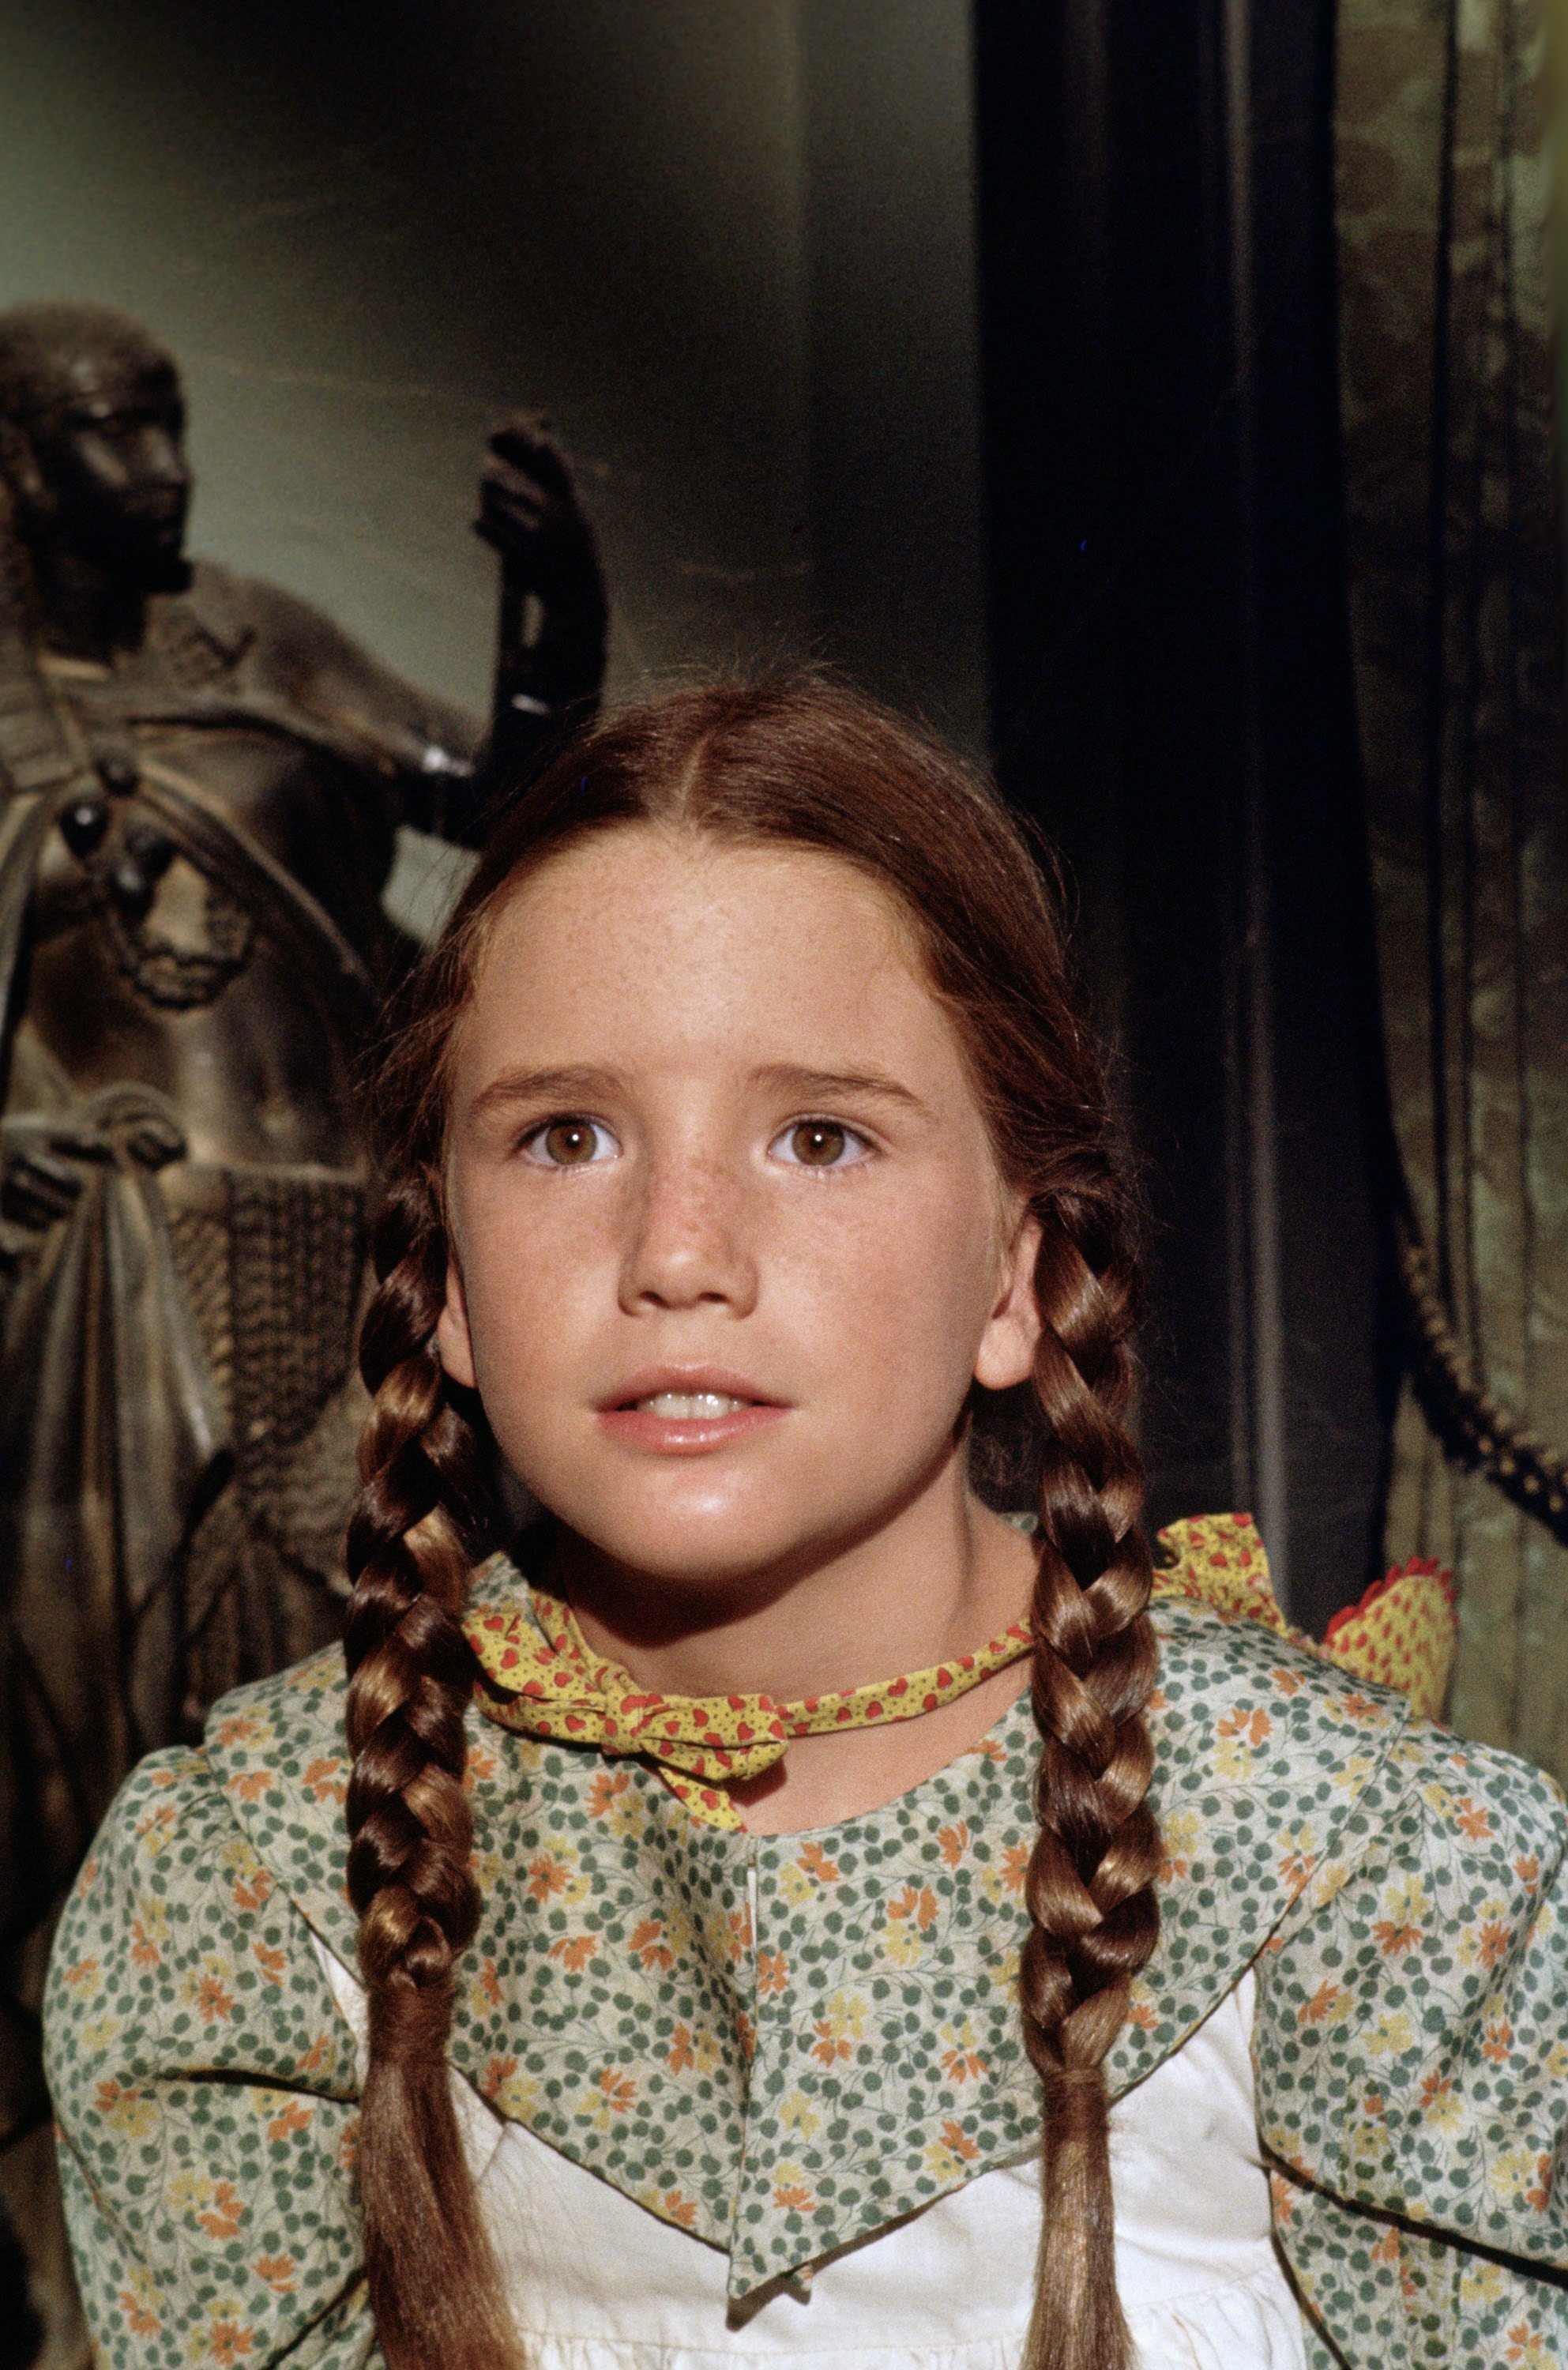 Melissa Gilbert as Laura Elizabeth Ingalls Wilder on an episode of "Little House on the Prairie" which aired on October 8, 1975 | Source: Getty Images